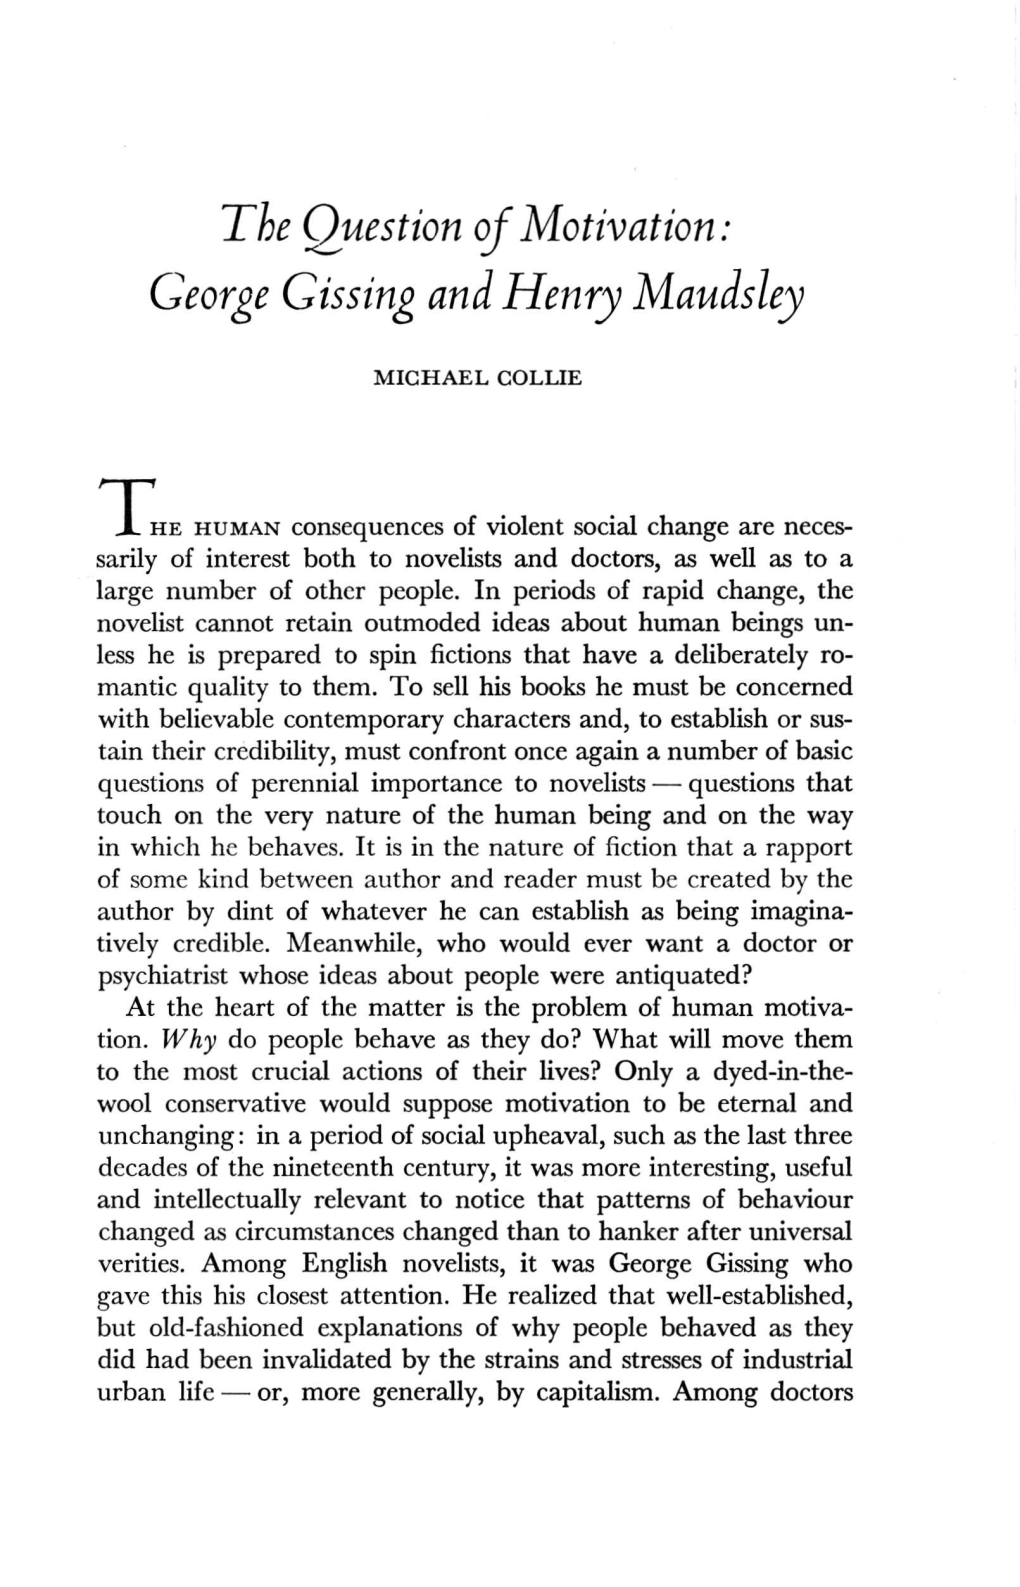 The Question of Motivation: George Gissing Ani Henry Maudsley